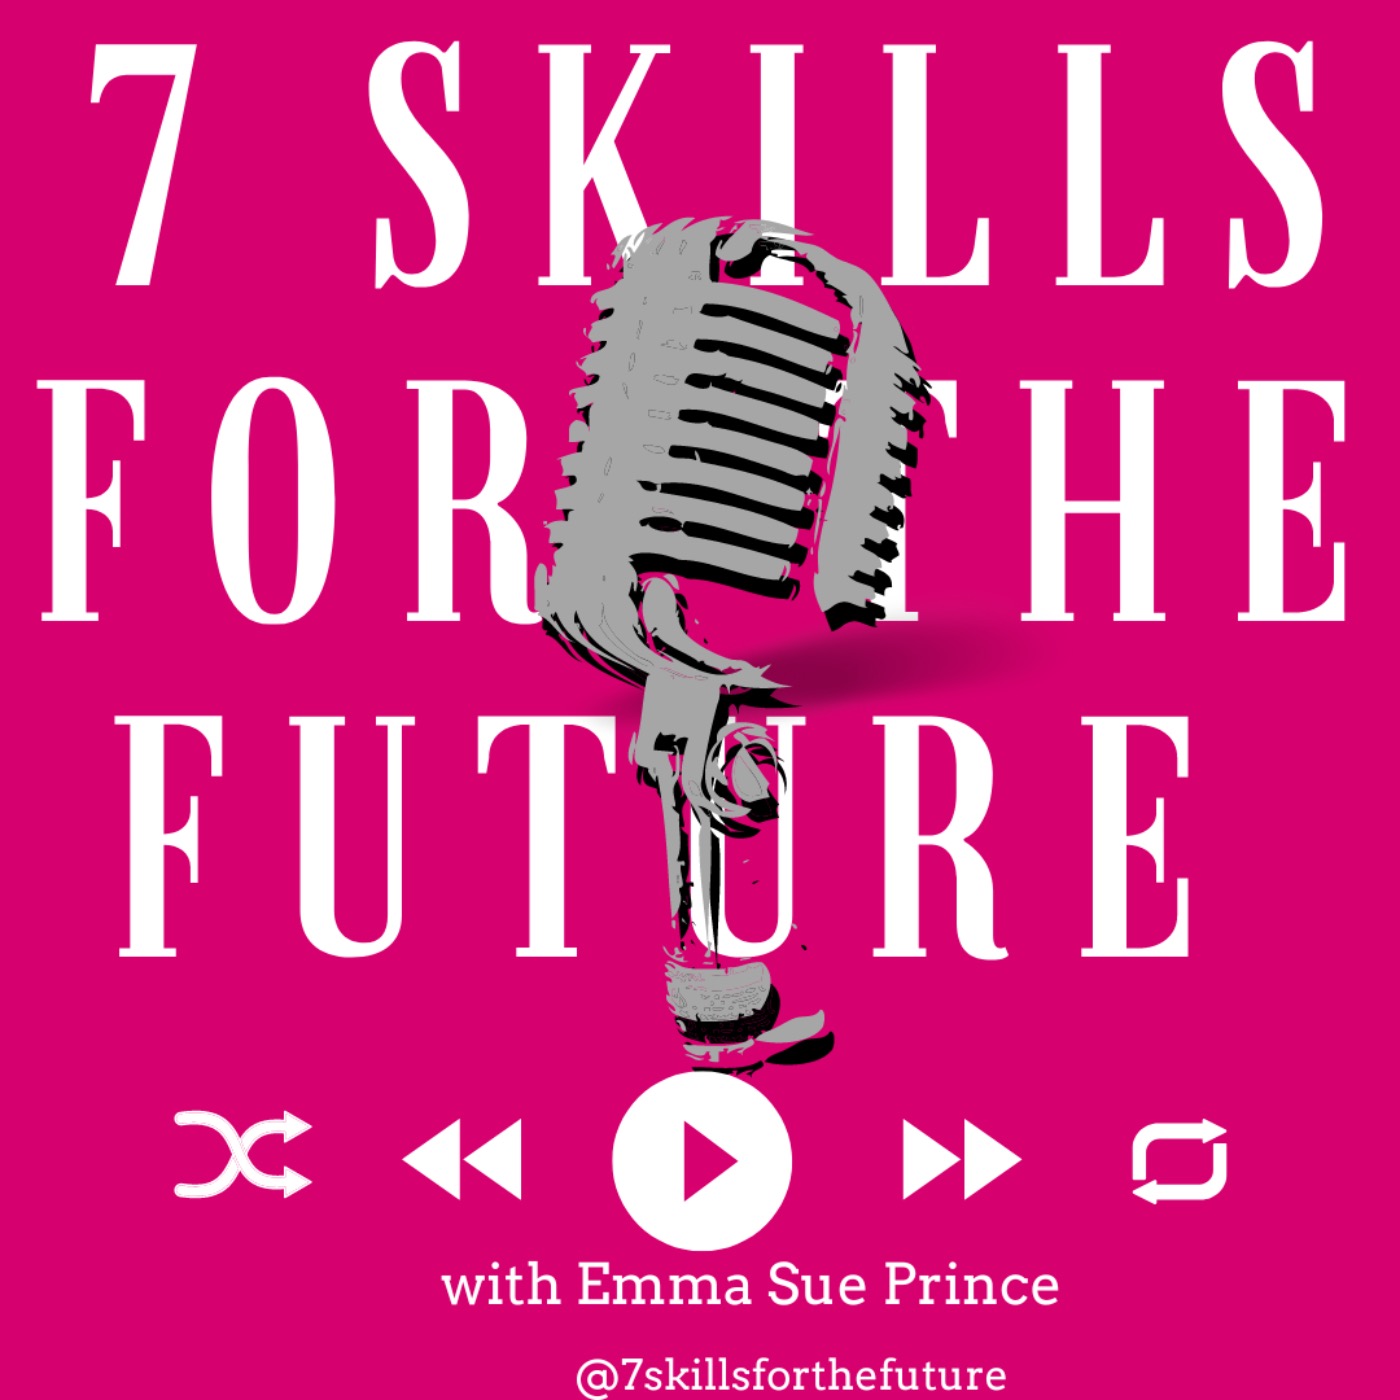 7 Skills For the Future